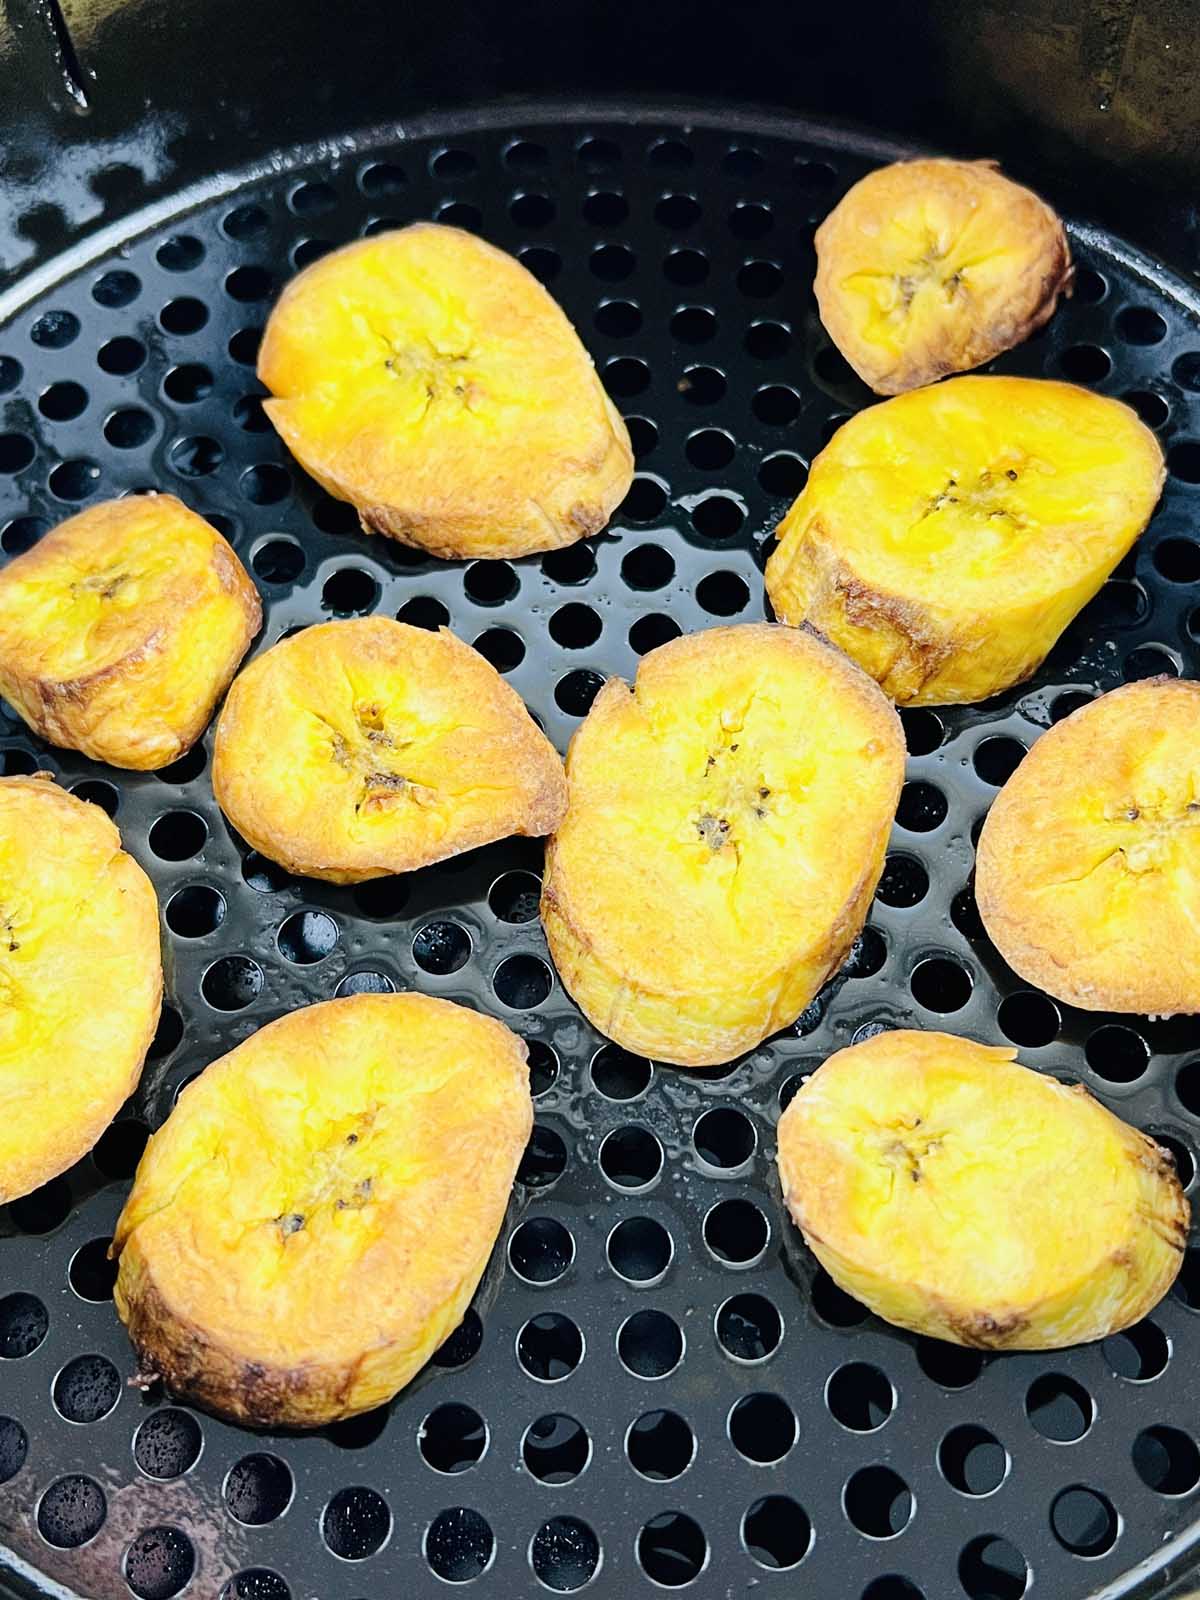 Cooked plantain slices in the air fryer basket.